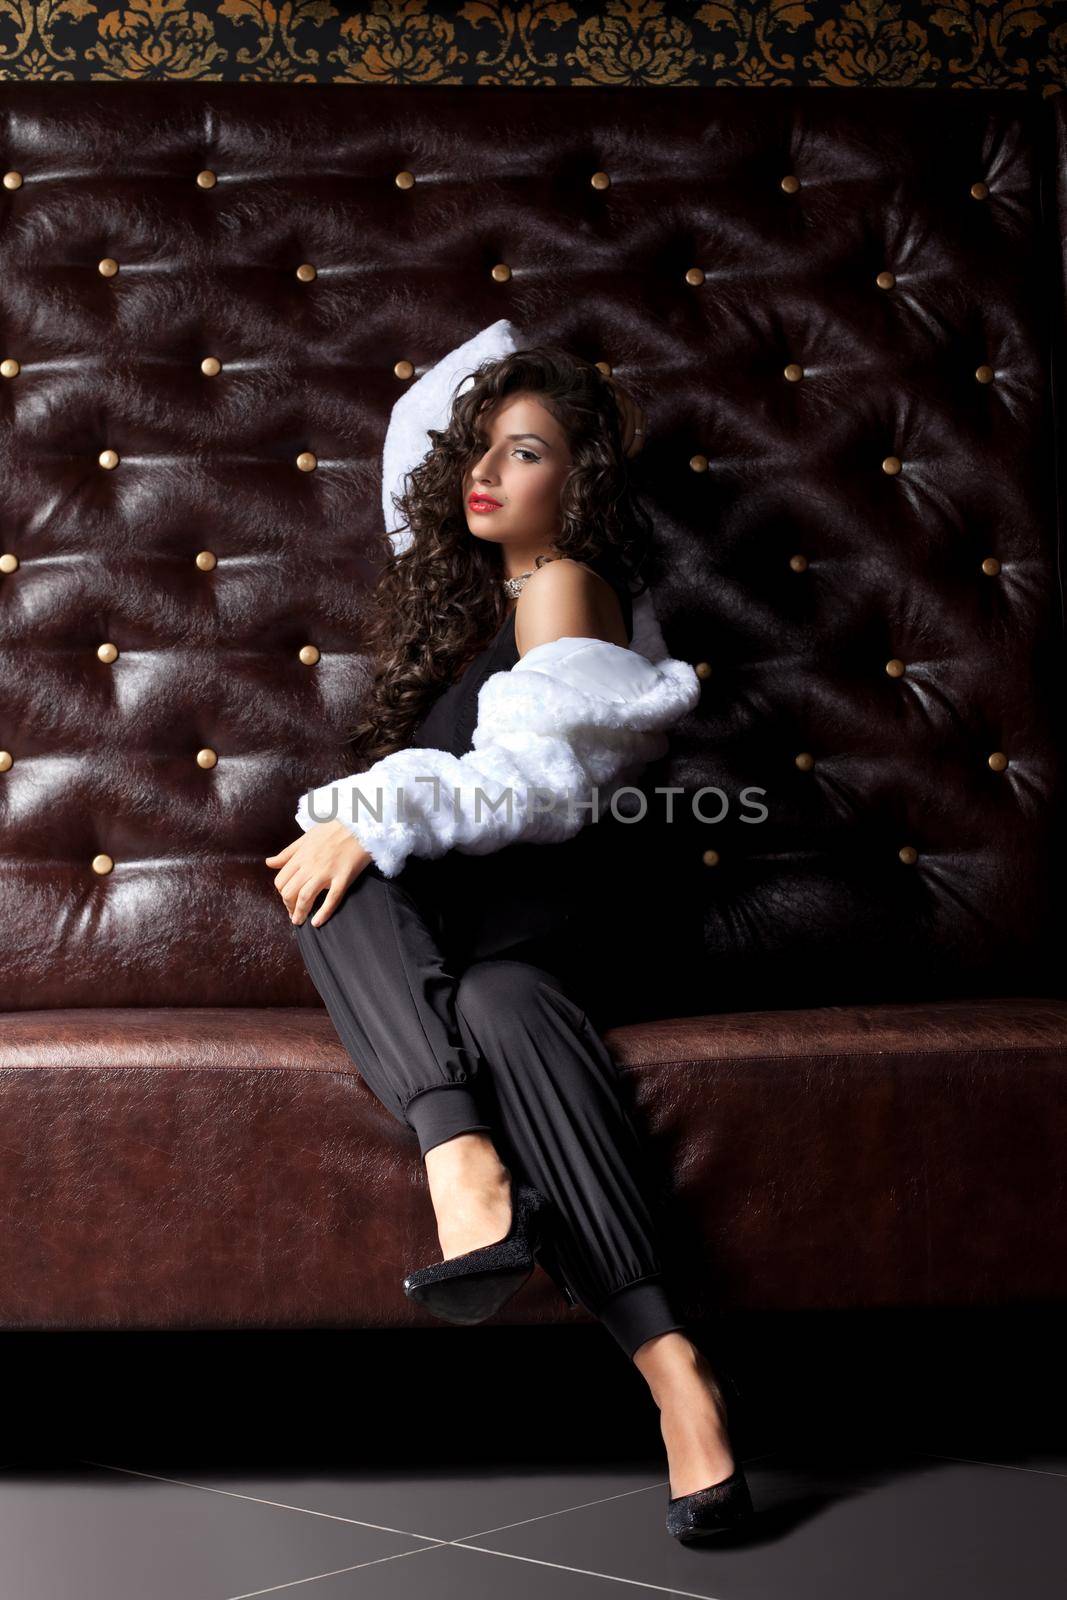 Beauty woman posing on leather sofa in dark by rivertime